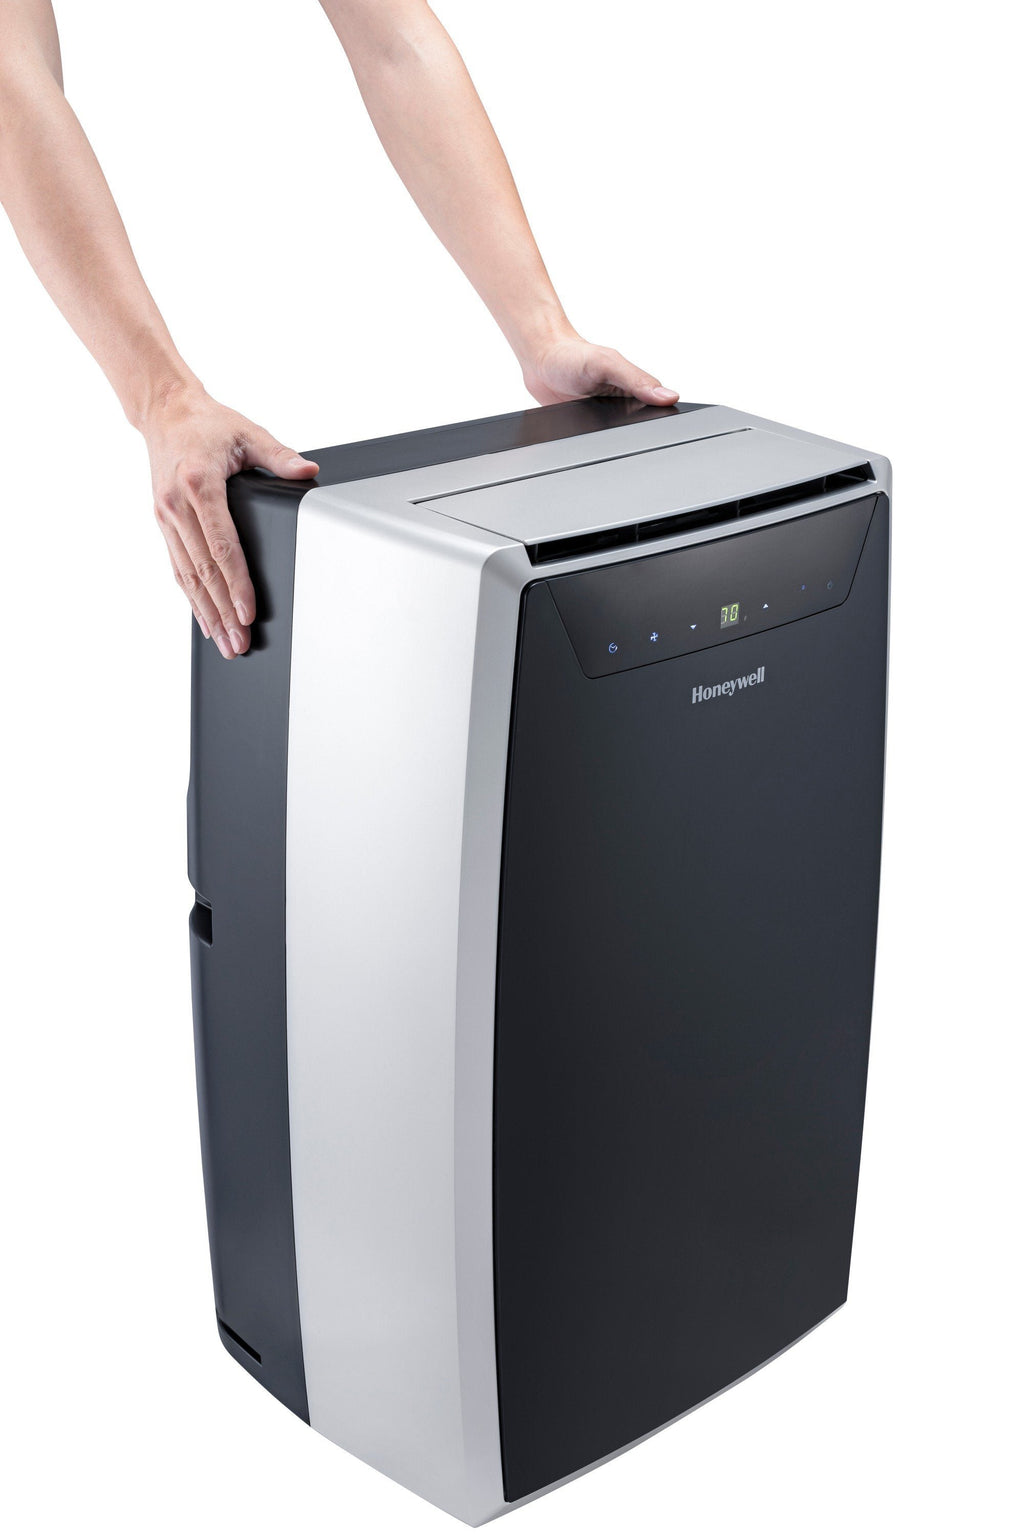 https://honeywellaircomfort.com/cdn/shop/products/honeywell-mn4cfs0-classic-portable-air-conditioner-with-dehumidifier-fan-cools-rooms-up-to-700-sq-ft-with-drain-pan-insulation-tape-black-silver-portable-air-conditioner--863333_88134cff-8483-4633-9772-83fde9880c73_1024x.jpg?v=1686038974